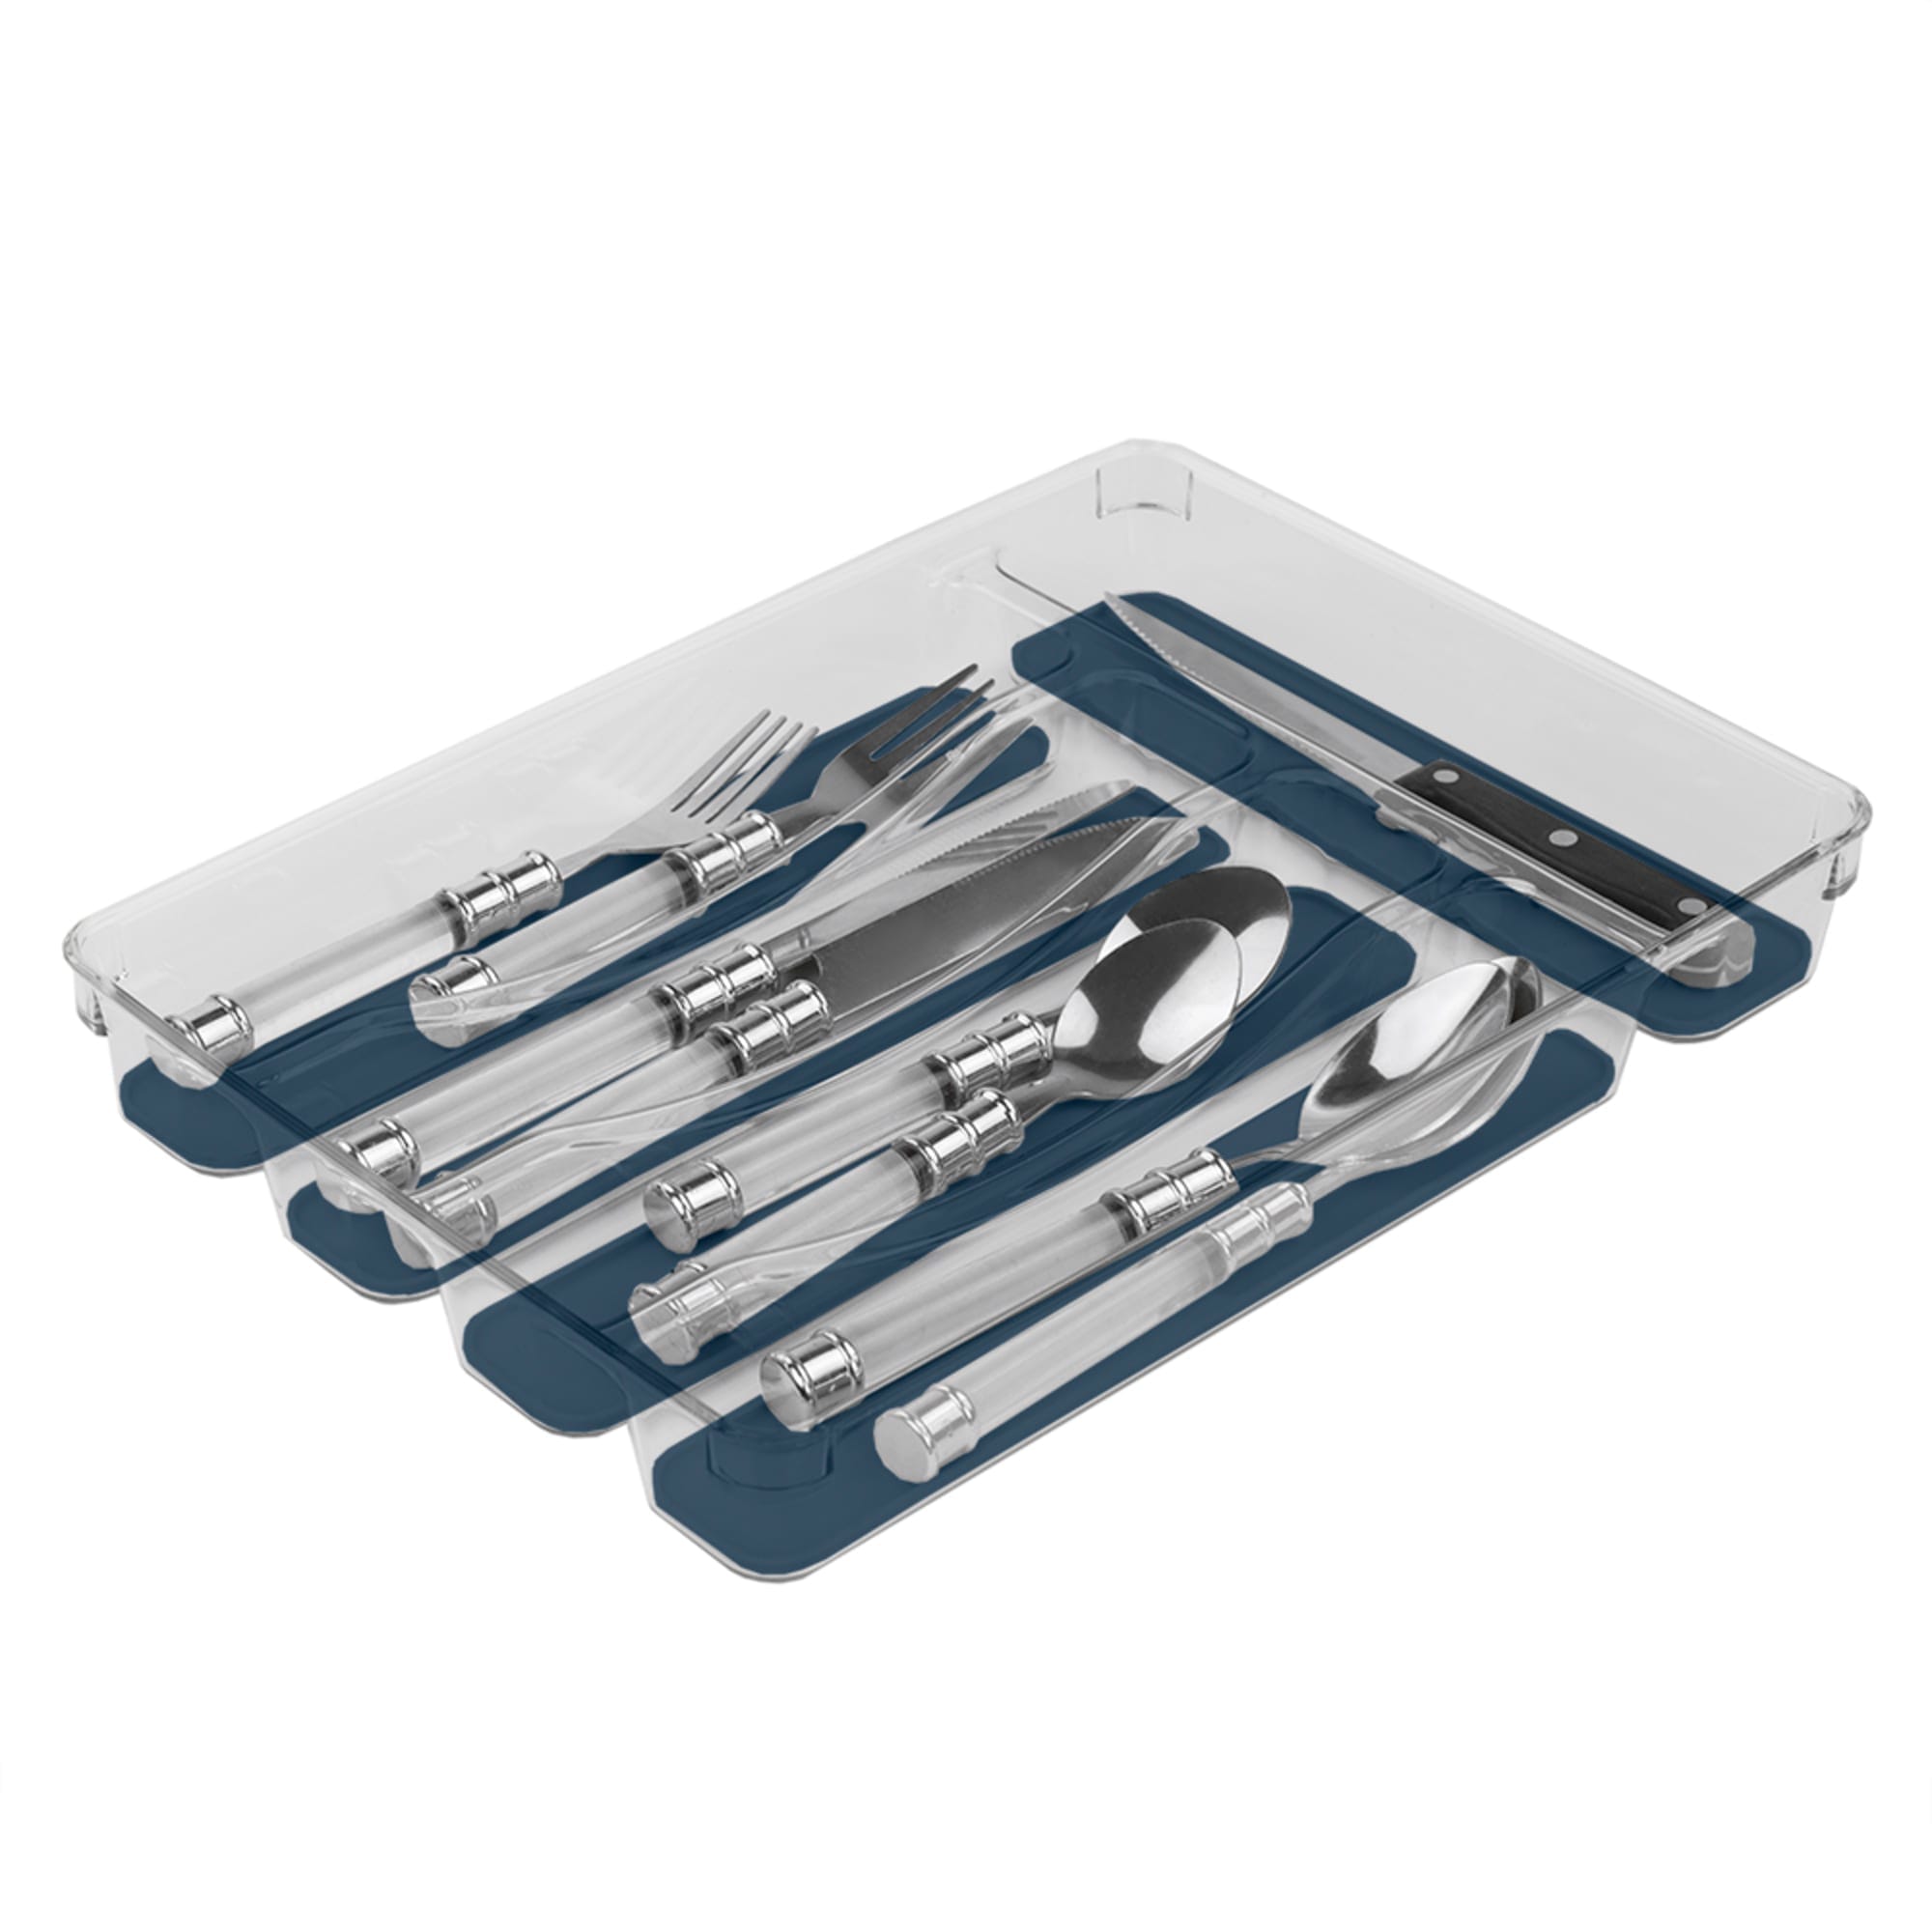 Michael Graves Design Medium 5 Compartment Rubber Lined Plastic Cutlery Tray, Indigo $6.00 EACH, CASE PACK OF 12